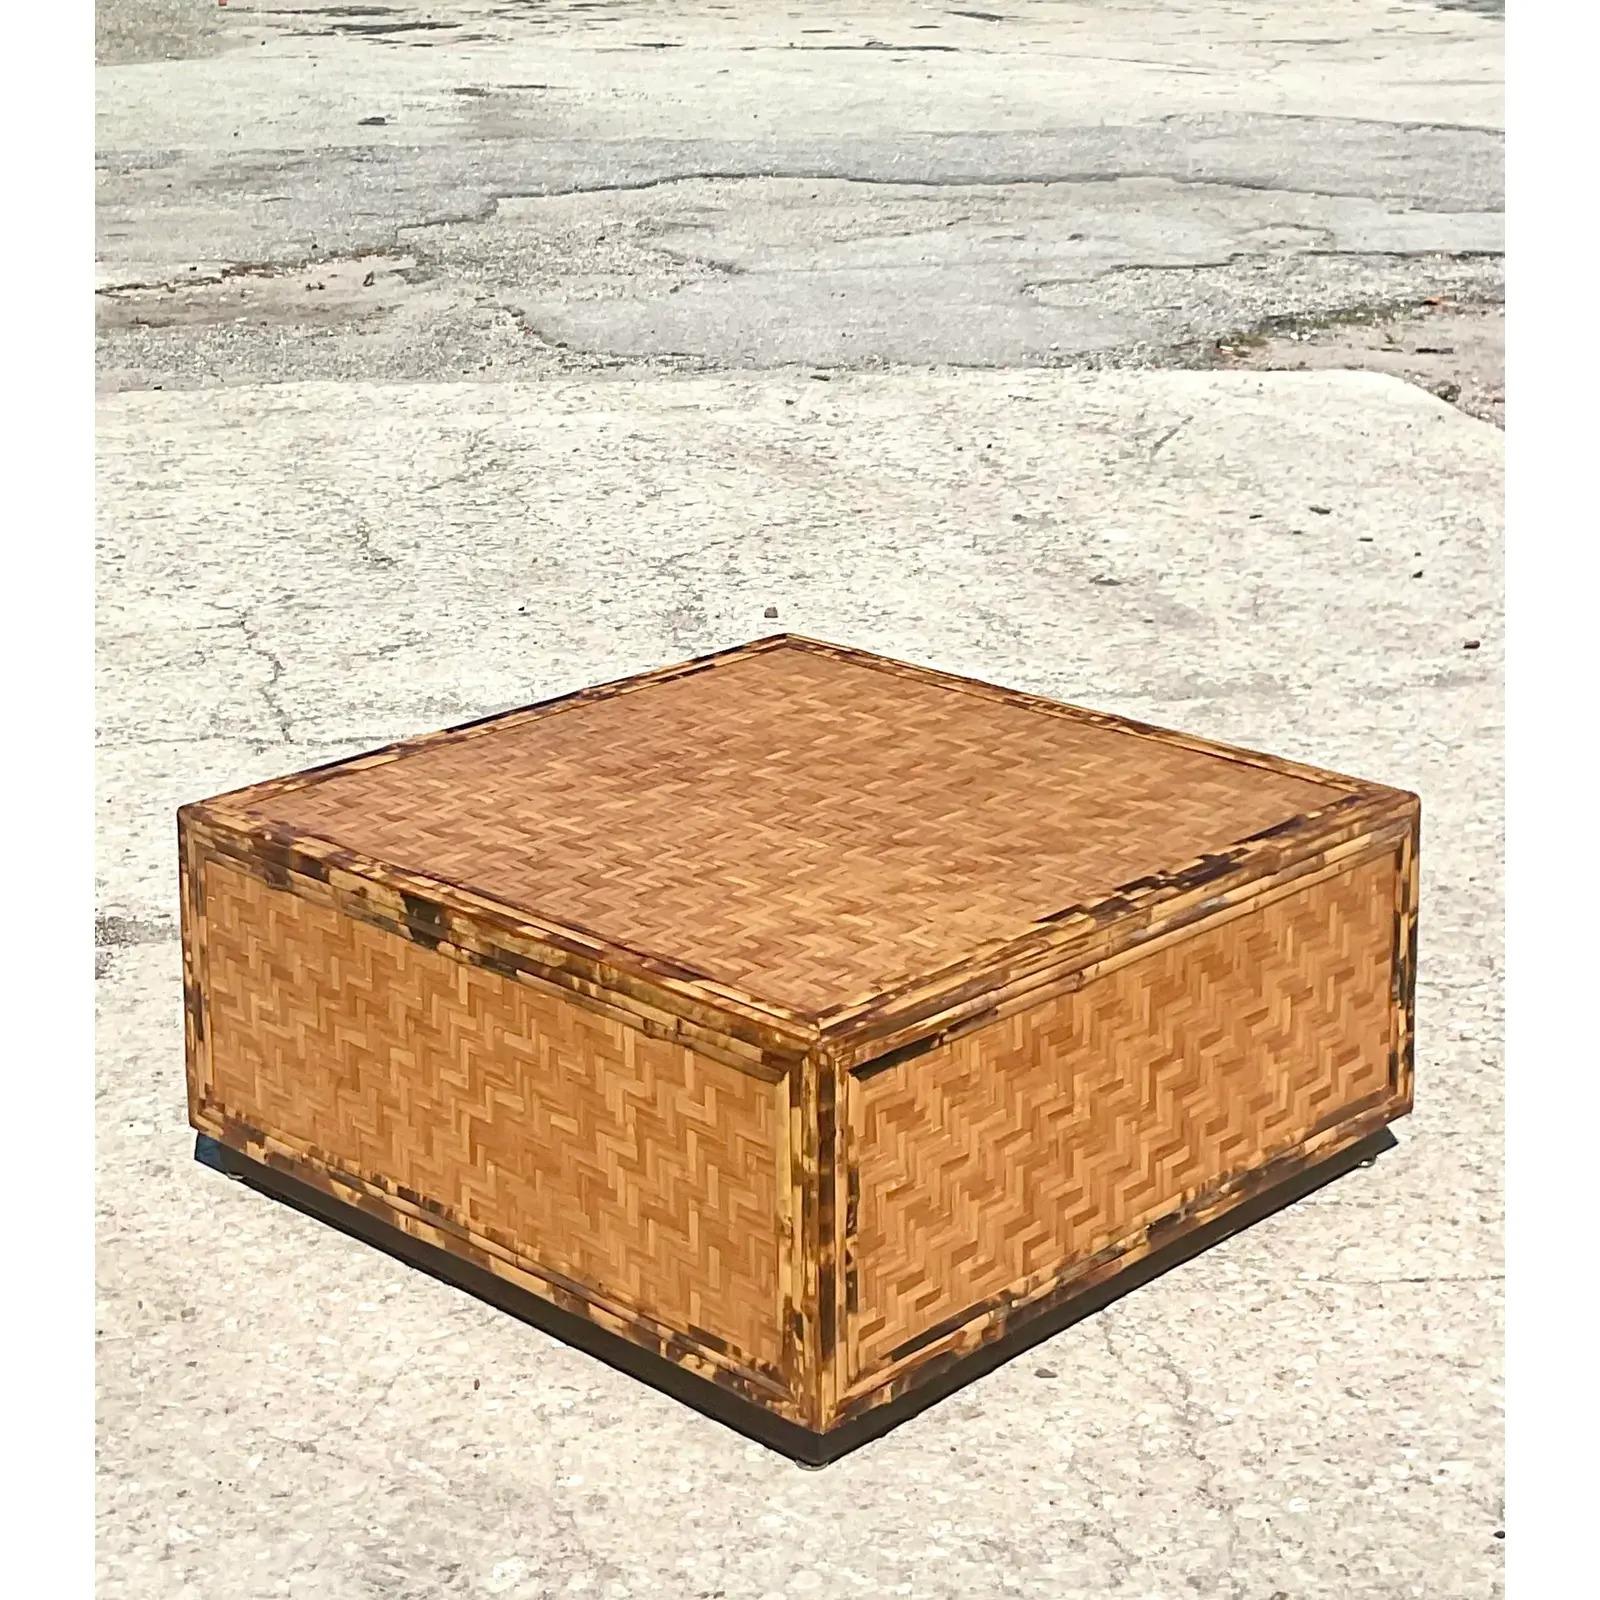 Fabulous vintage Parquet rattan coffee table. A beautiful and versatile design with chic tortoise shell finish on the trim. Perfect as is or just add glass for extra glamour. Acquired from a Palm Beach estate.